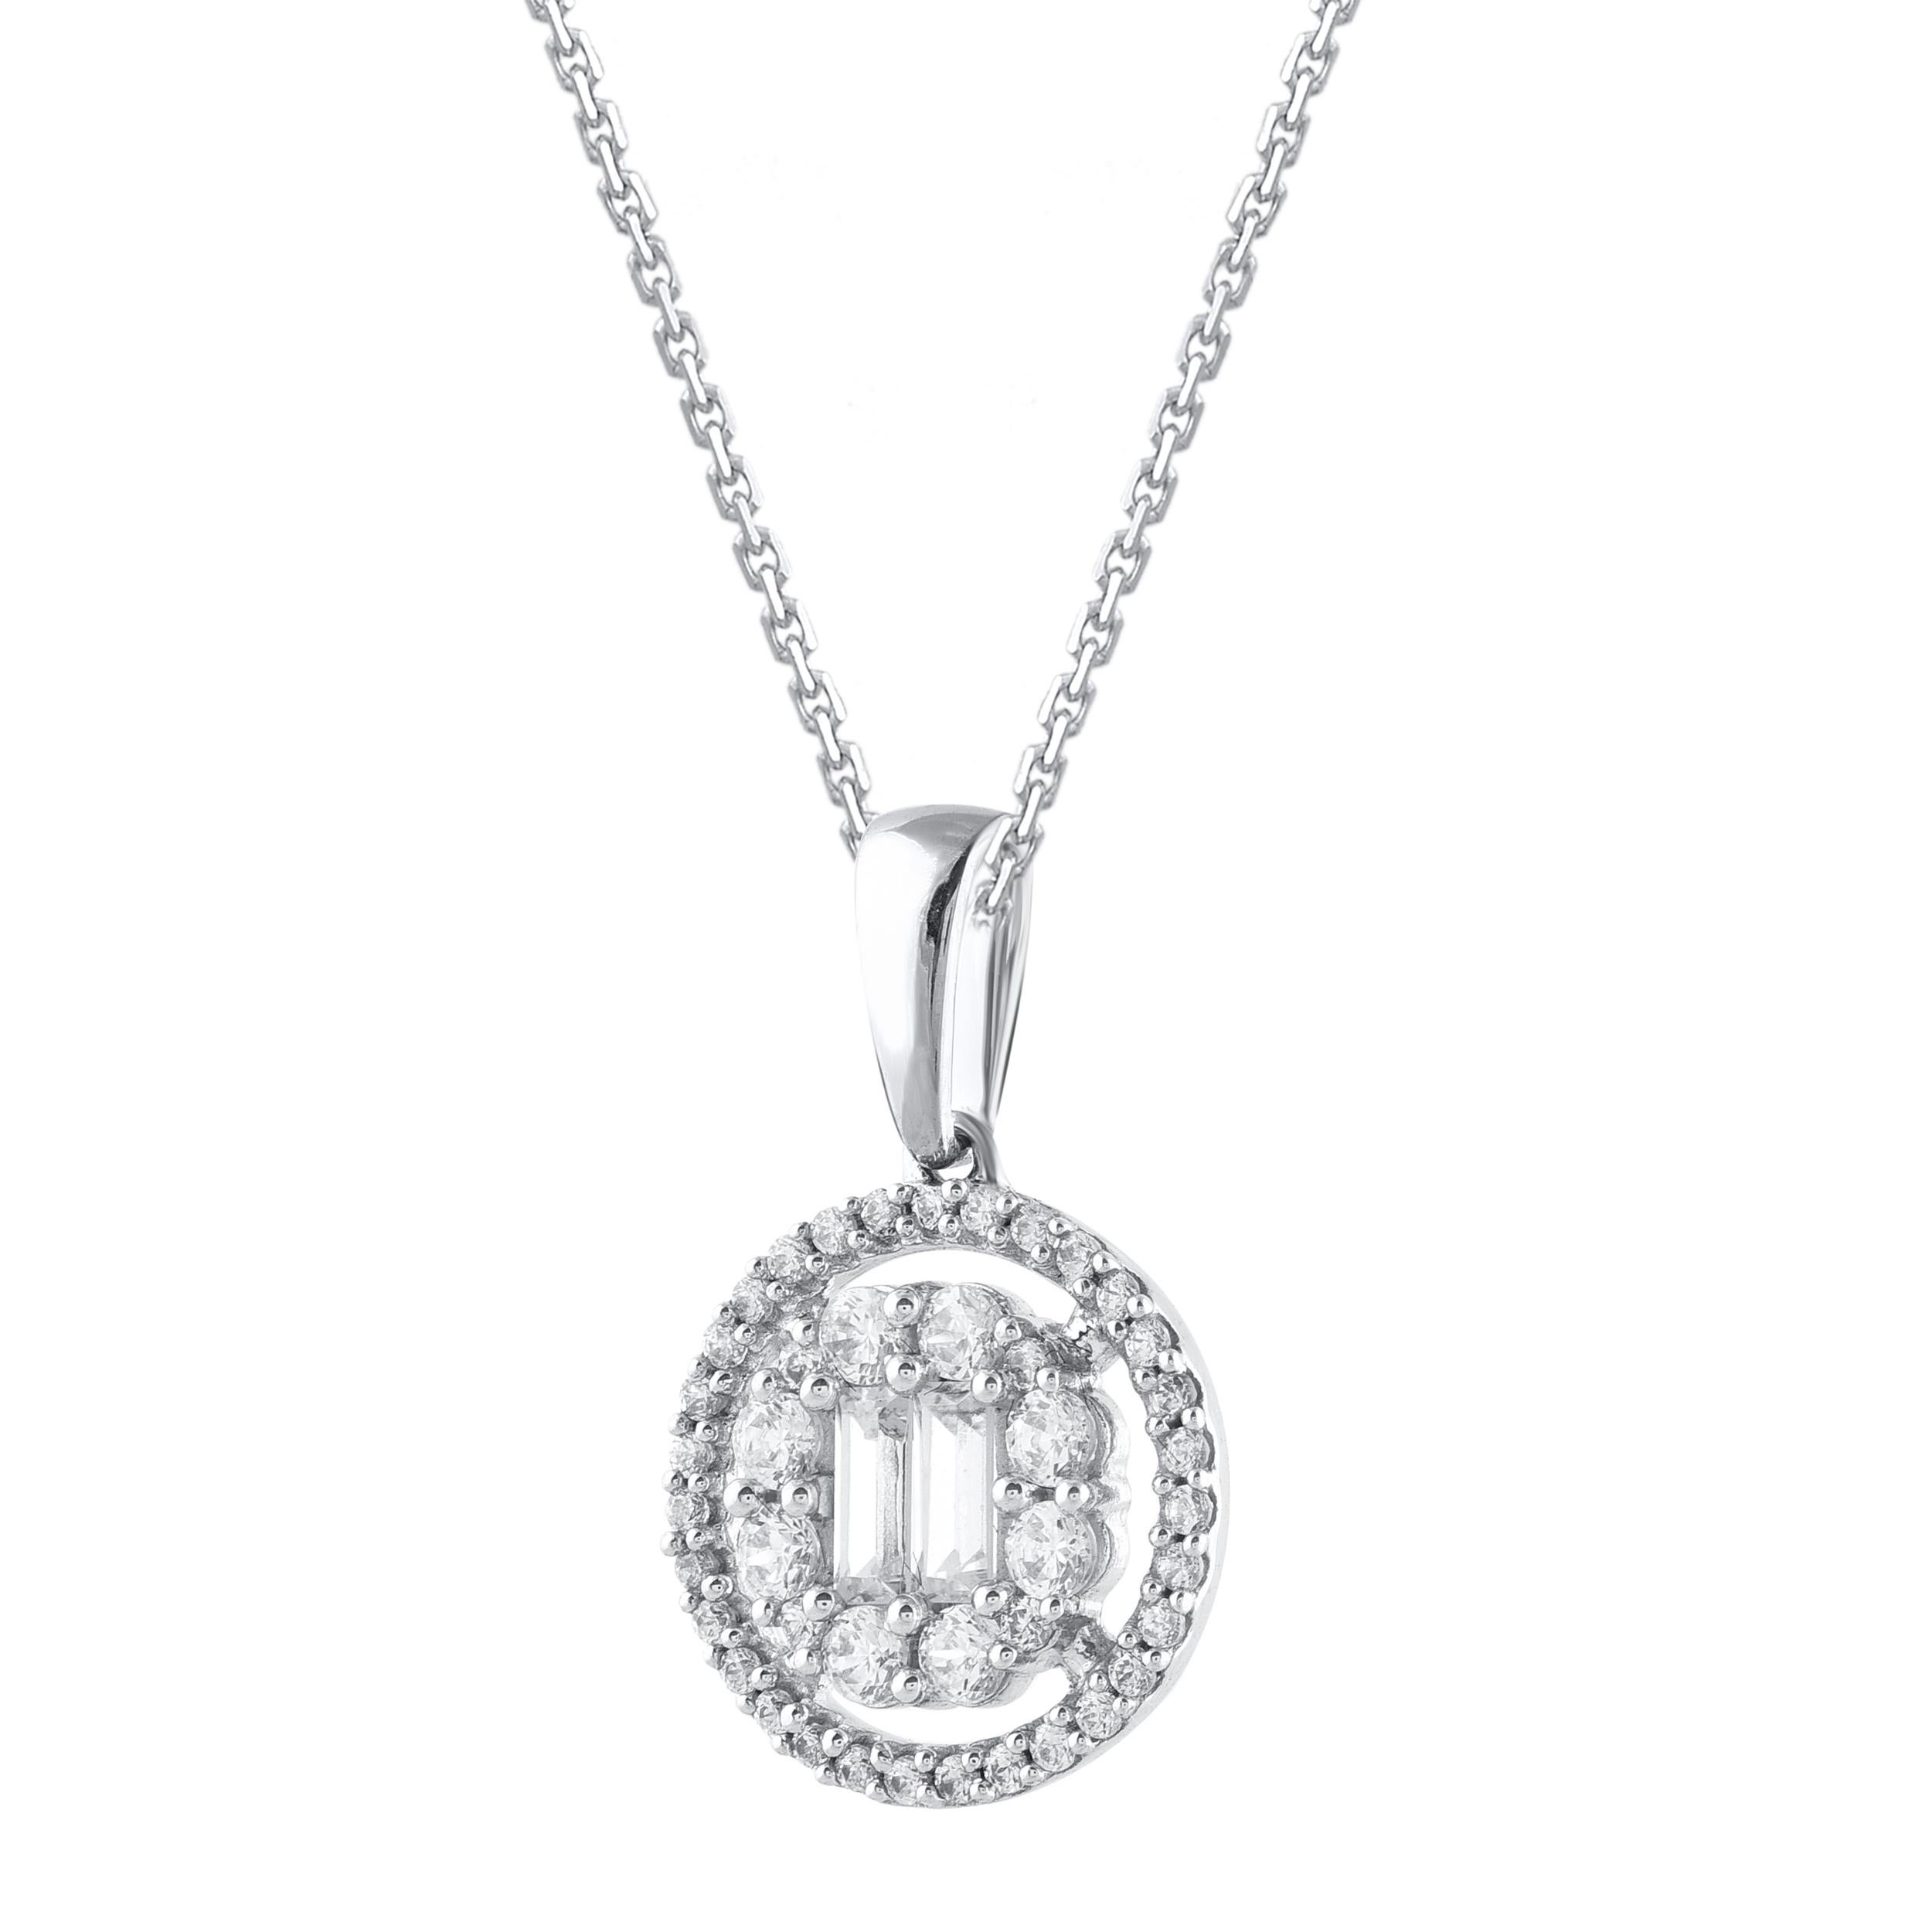 This diamond circle pendant fits any occasion with ease. This beautiful diamond pendant necklace is studded with 45 round diamonds and baguette cut diamonds in prong setting. The total diamond weight of these pendant is 0.50 carats. All the diamonds